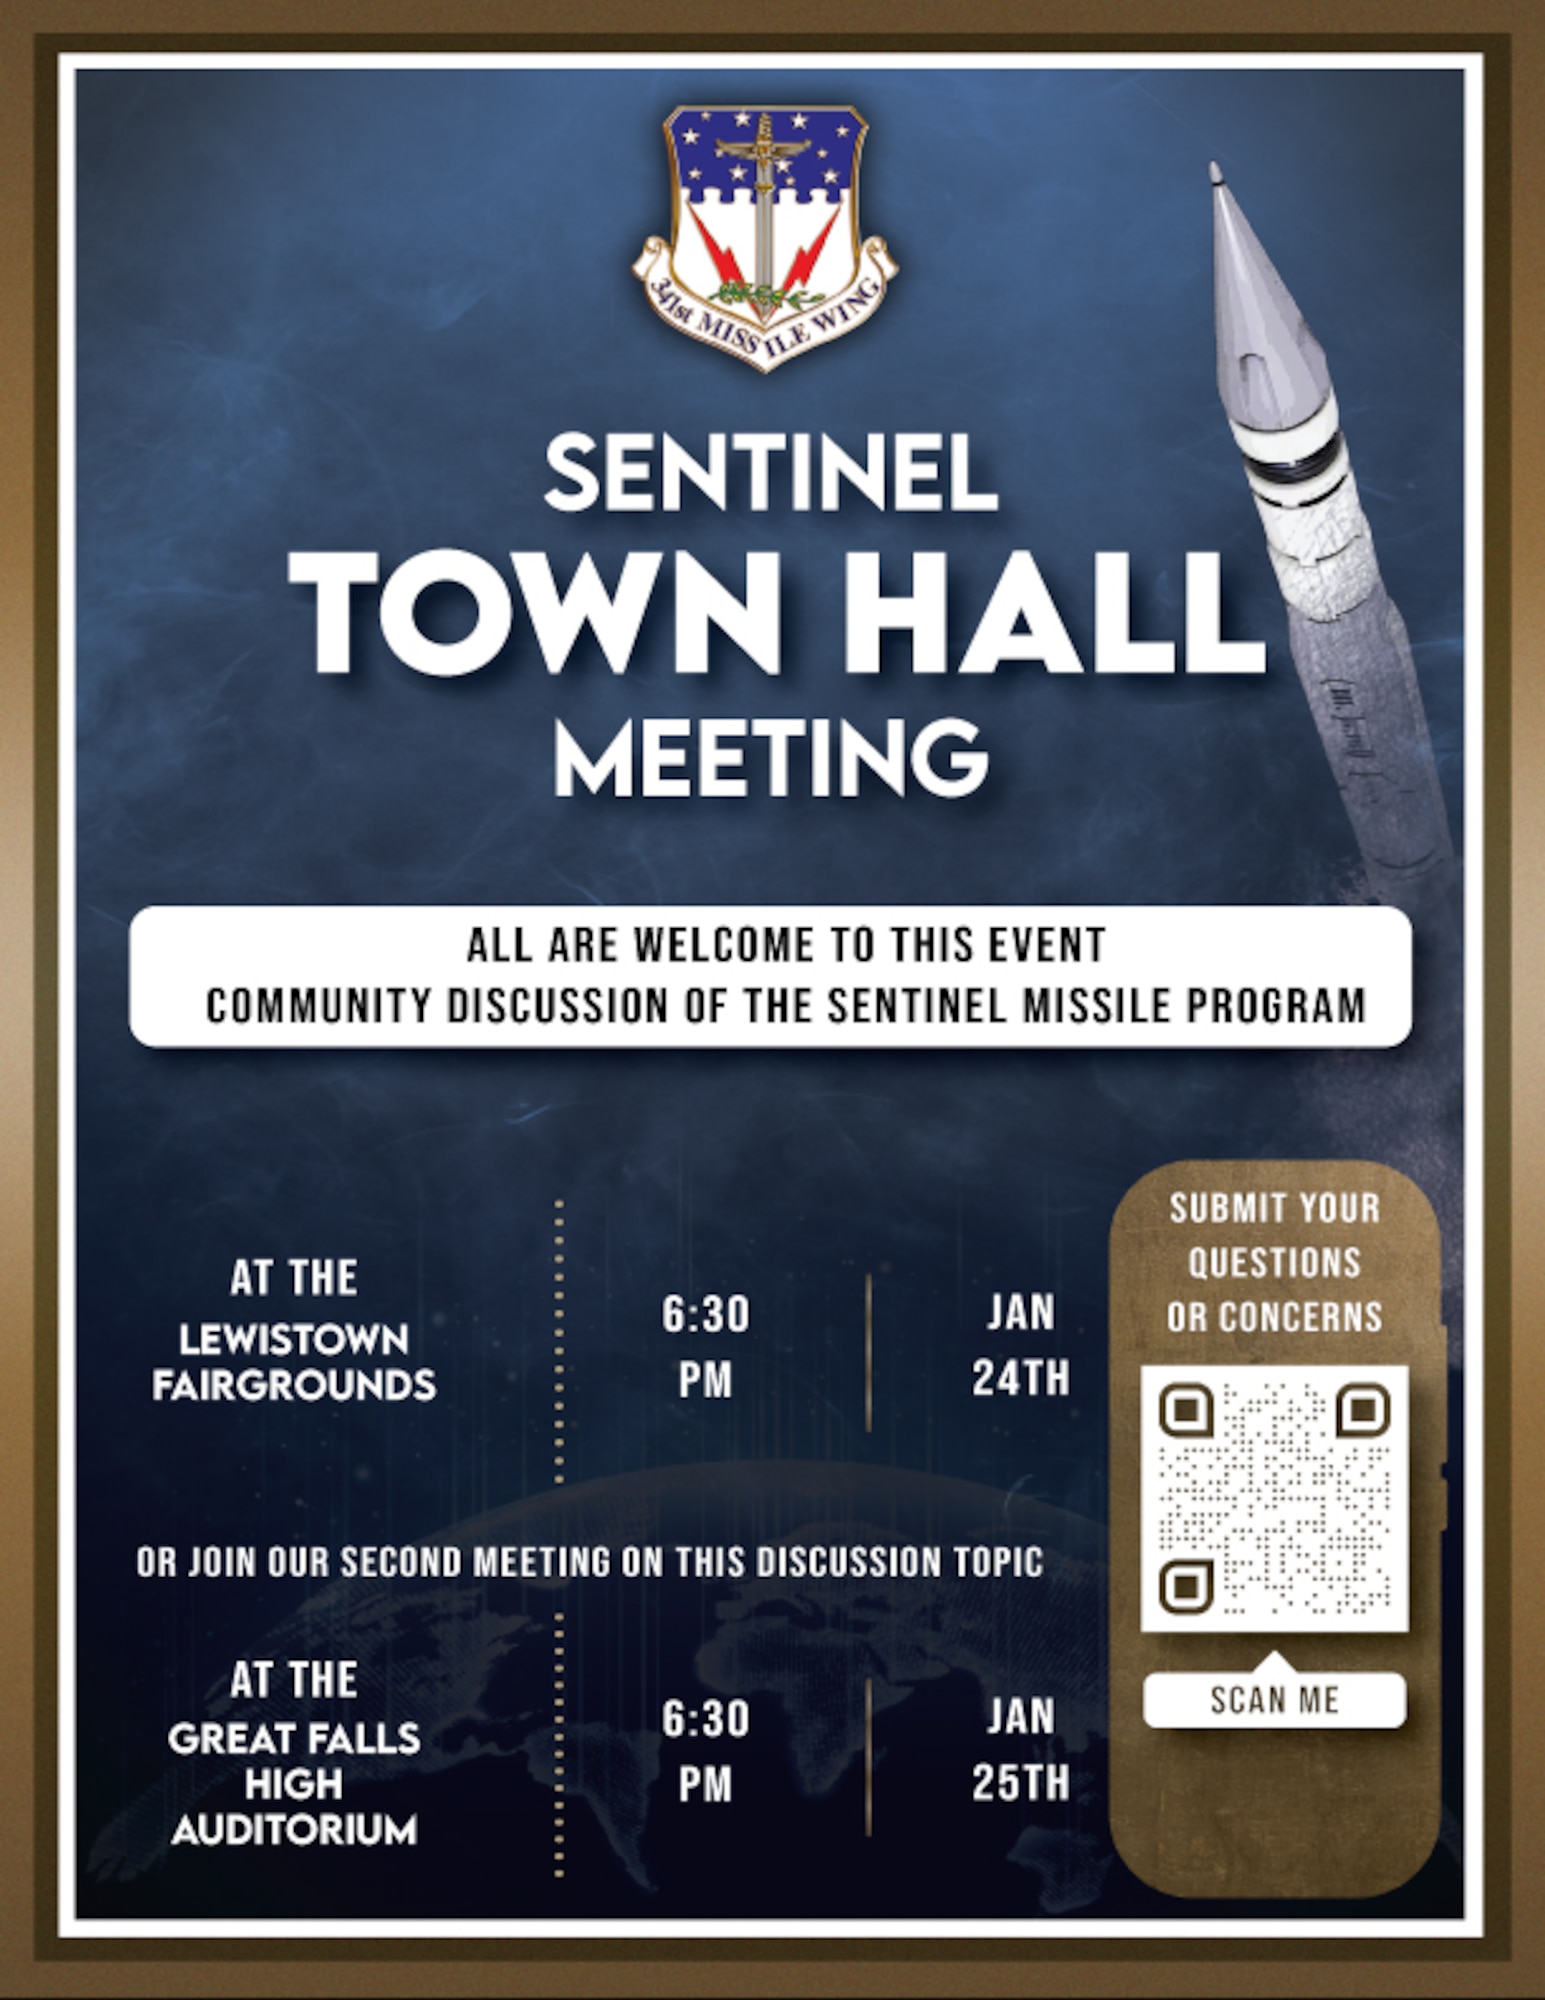 A flyer containing information about a town hall.